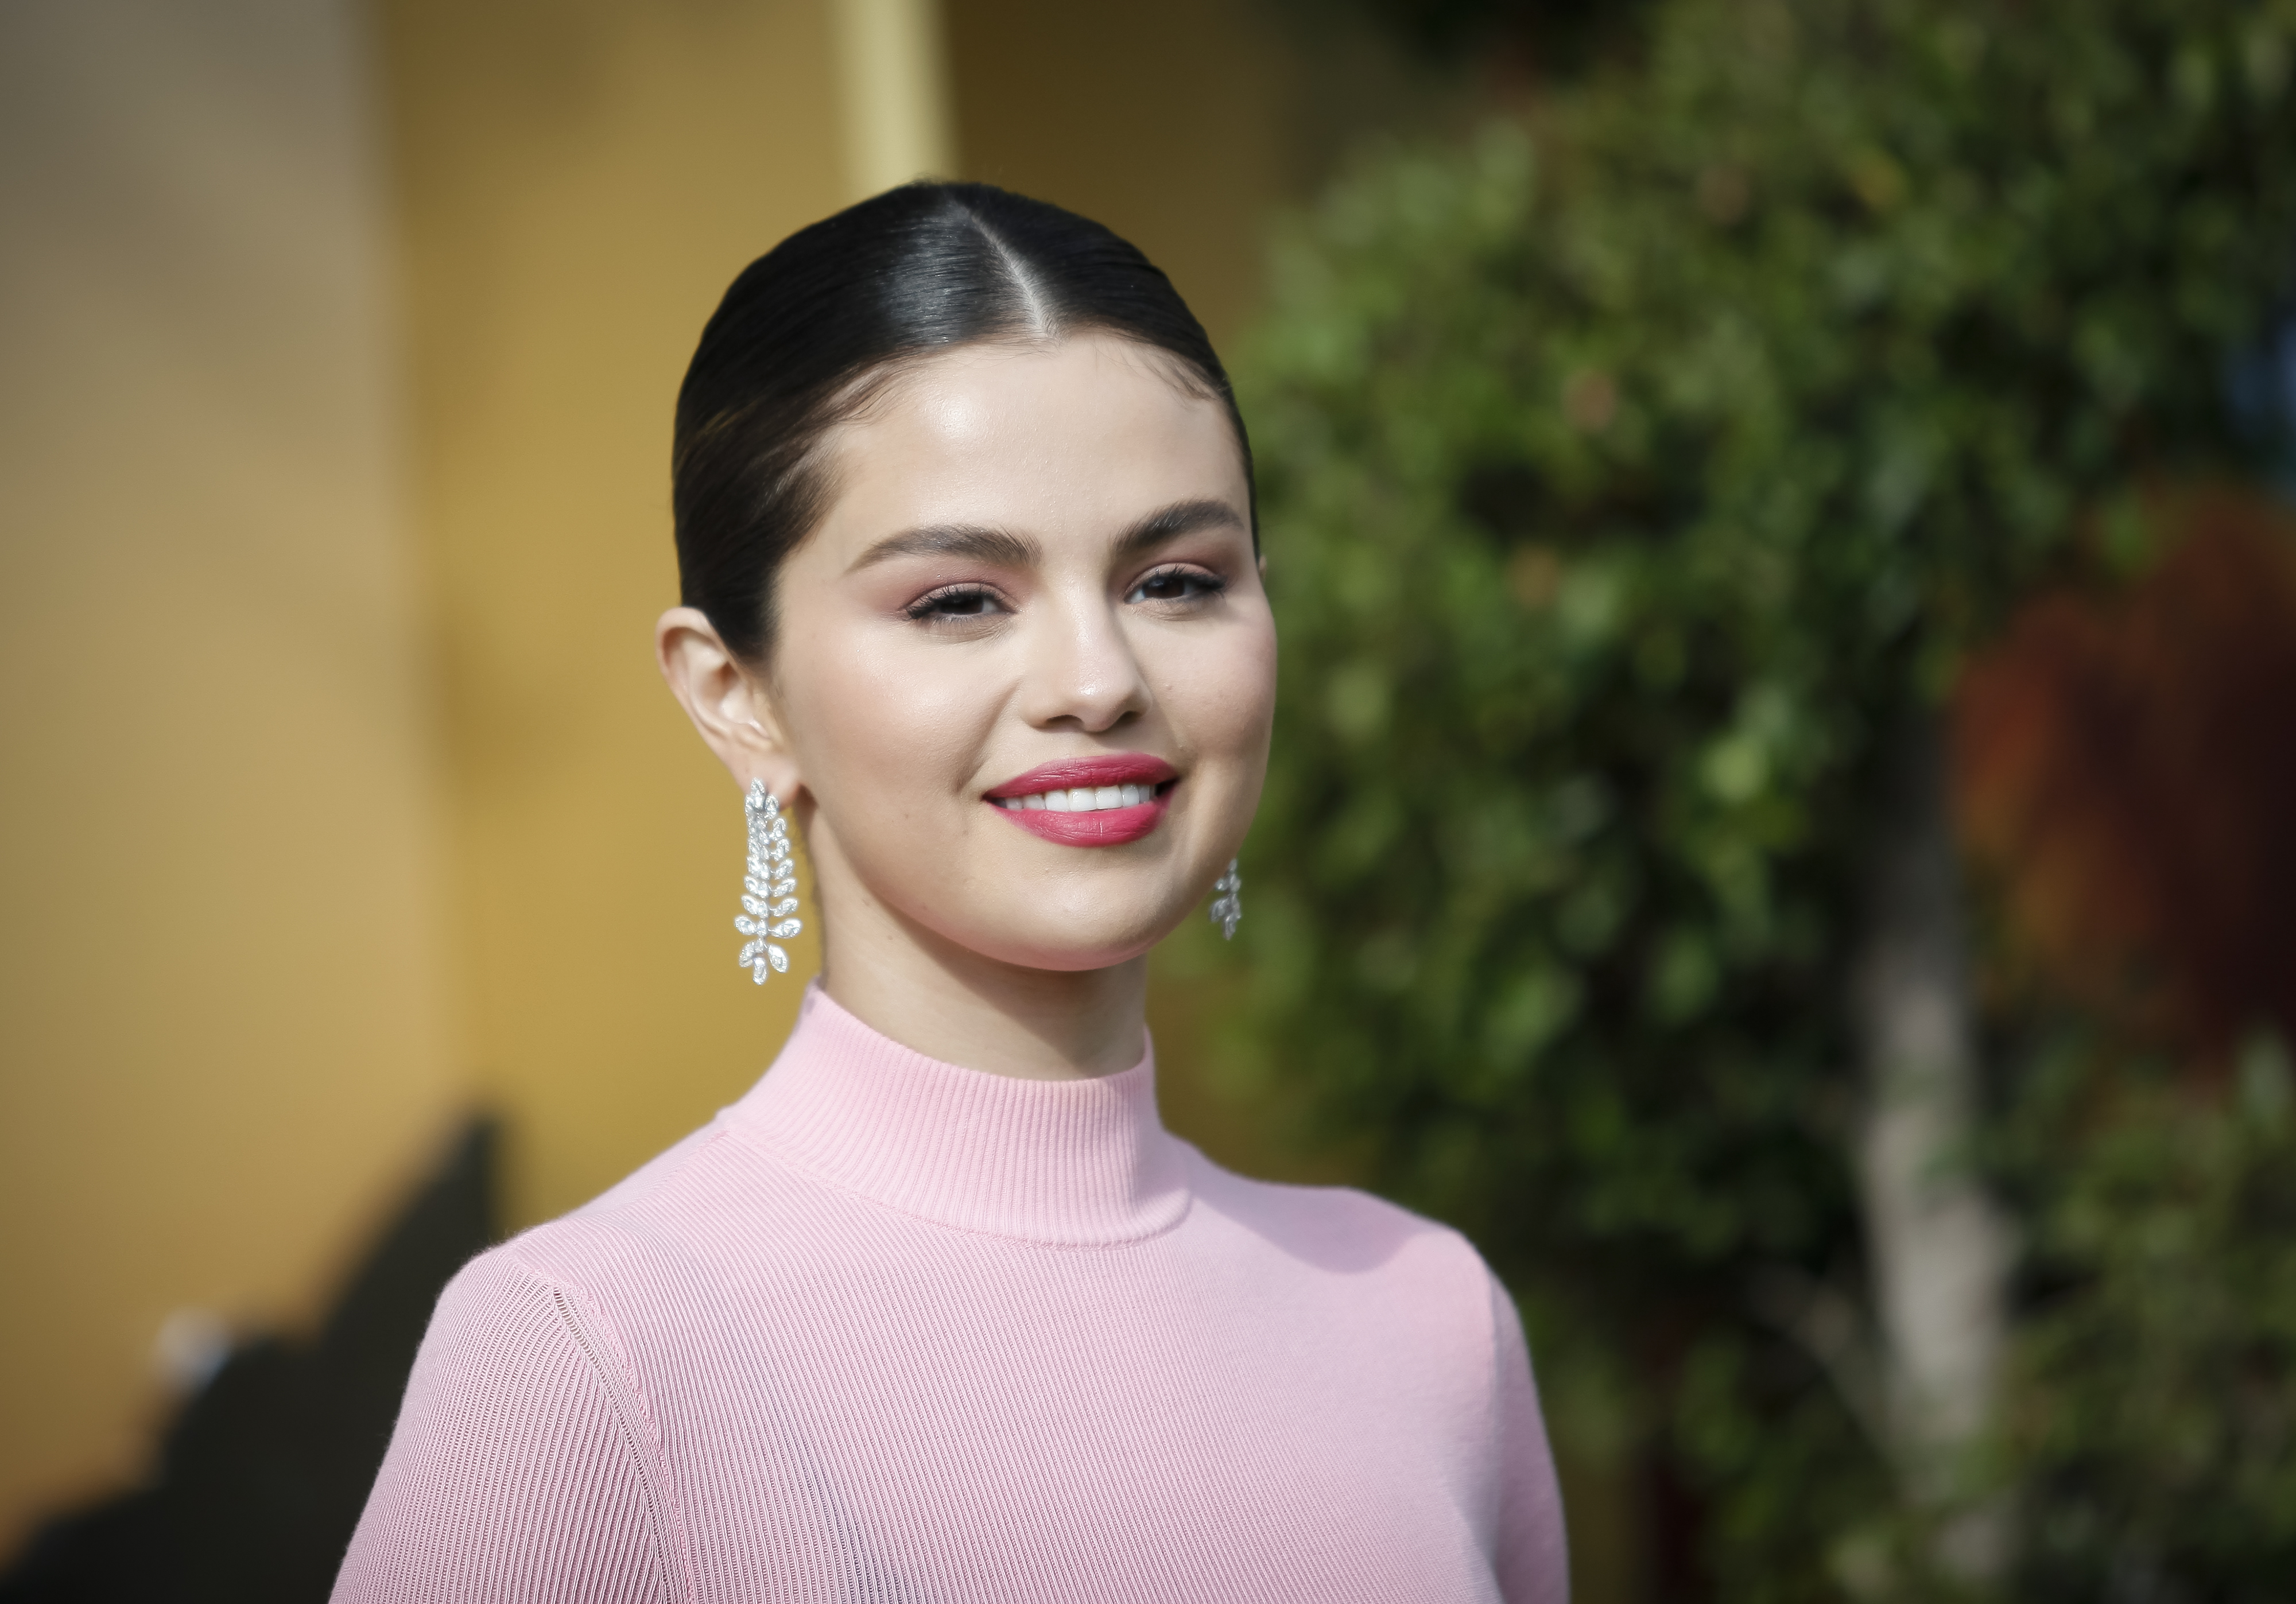 Selena Gomez at the premiere of Universal Pictures' "Dolittle" on January 11, 2020, in Westwood, California. | Source: Getty Images